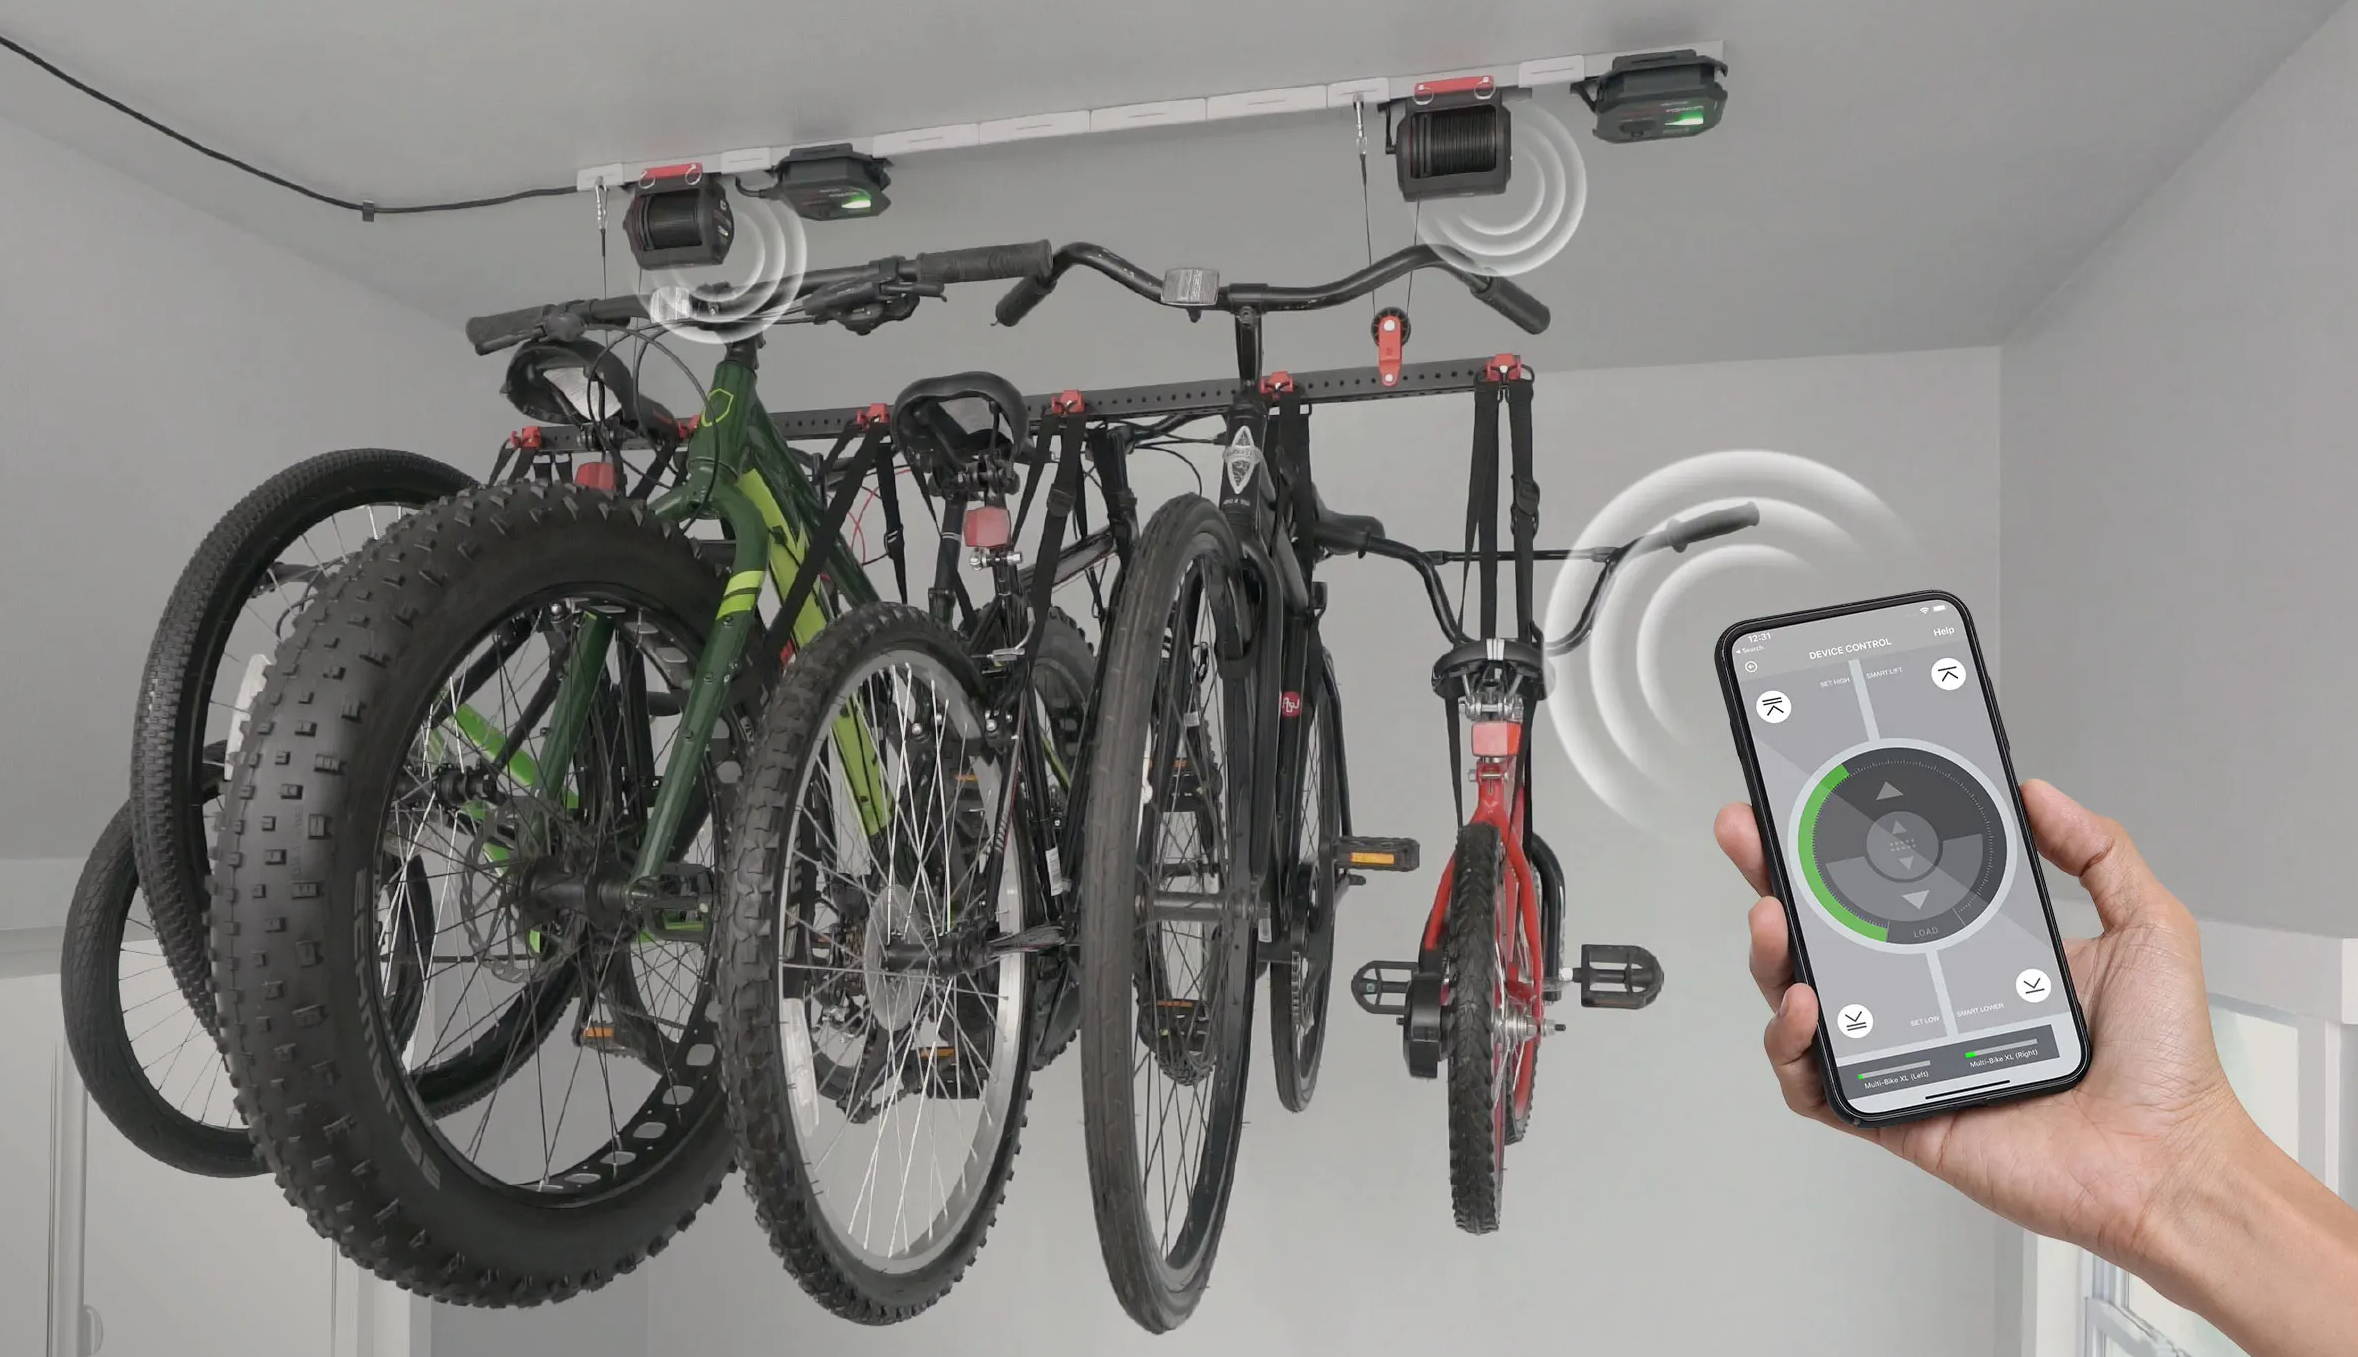 Multi-Bike XL controlled with a phone